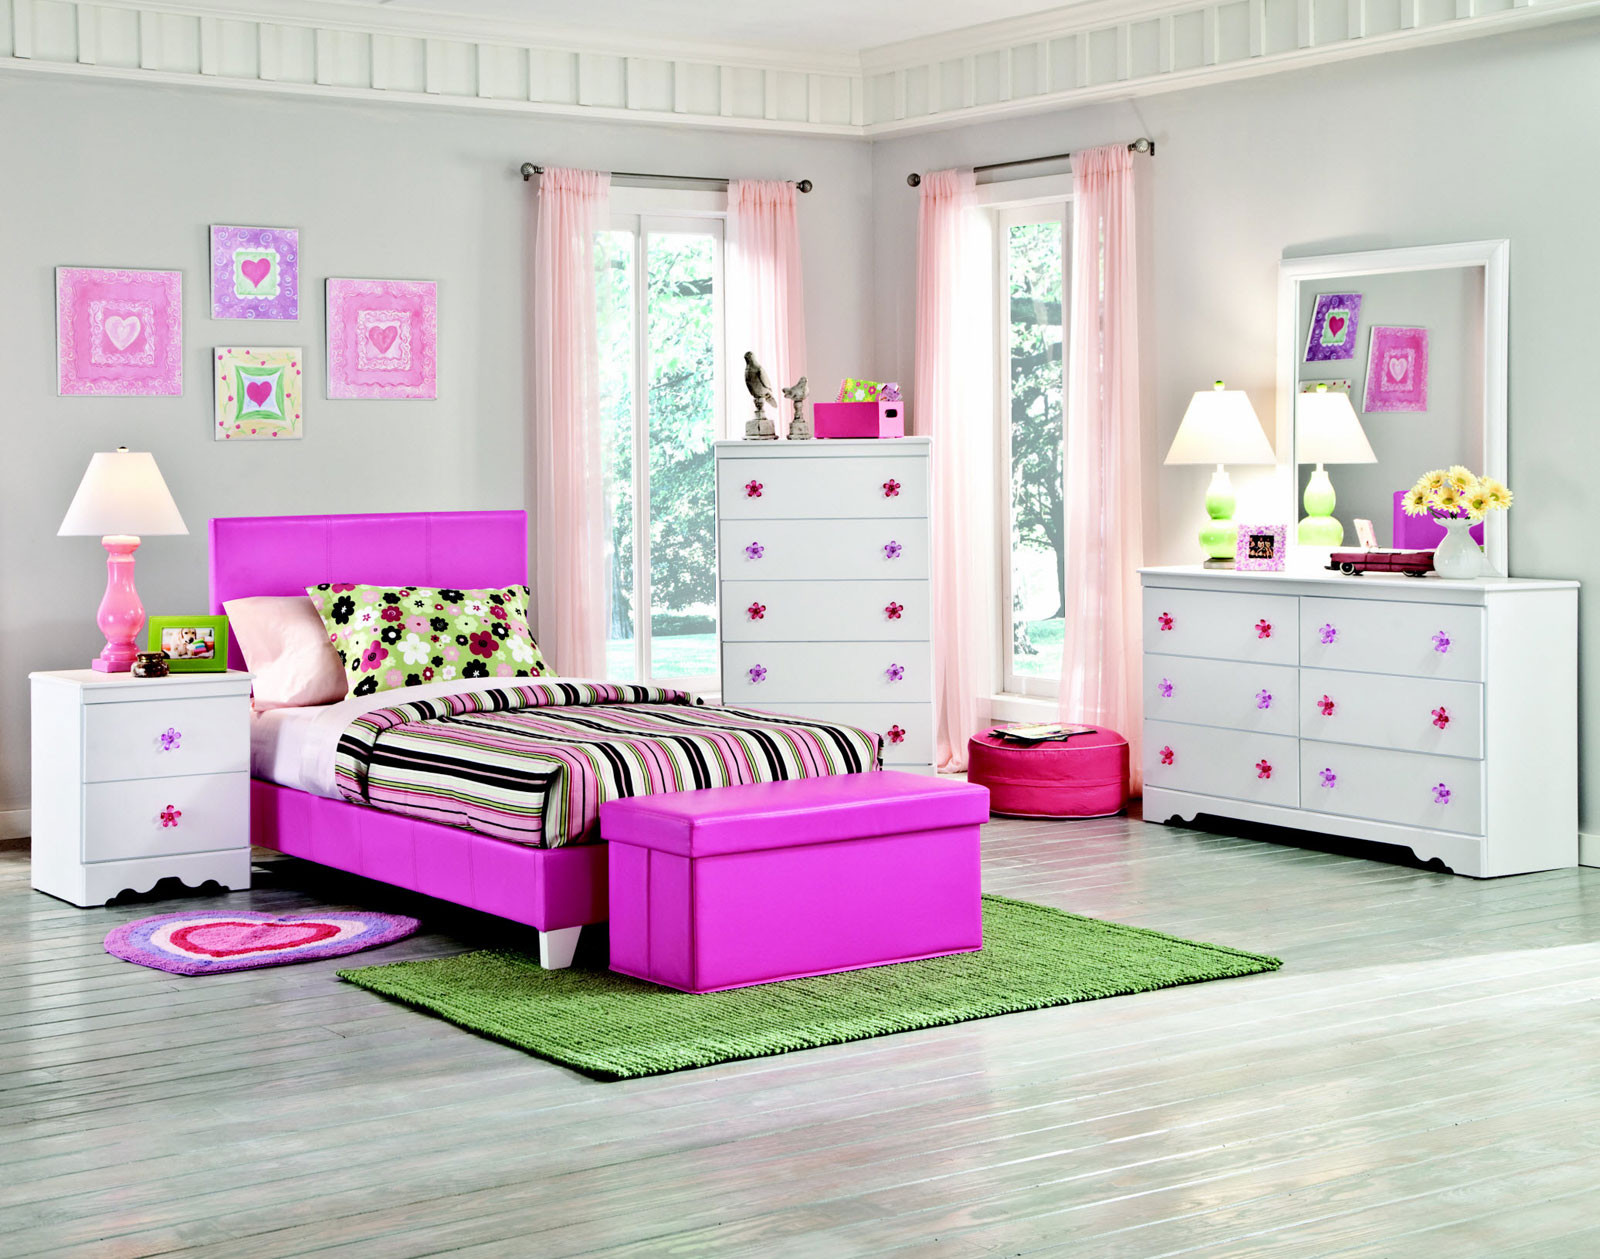 Cute Bedroom Sets For Girls
 Girls Bedroom Sets bining The Cute Aspects Amaza Design